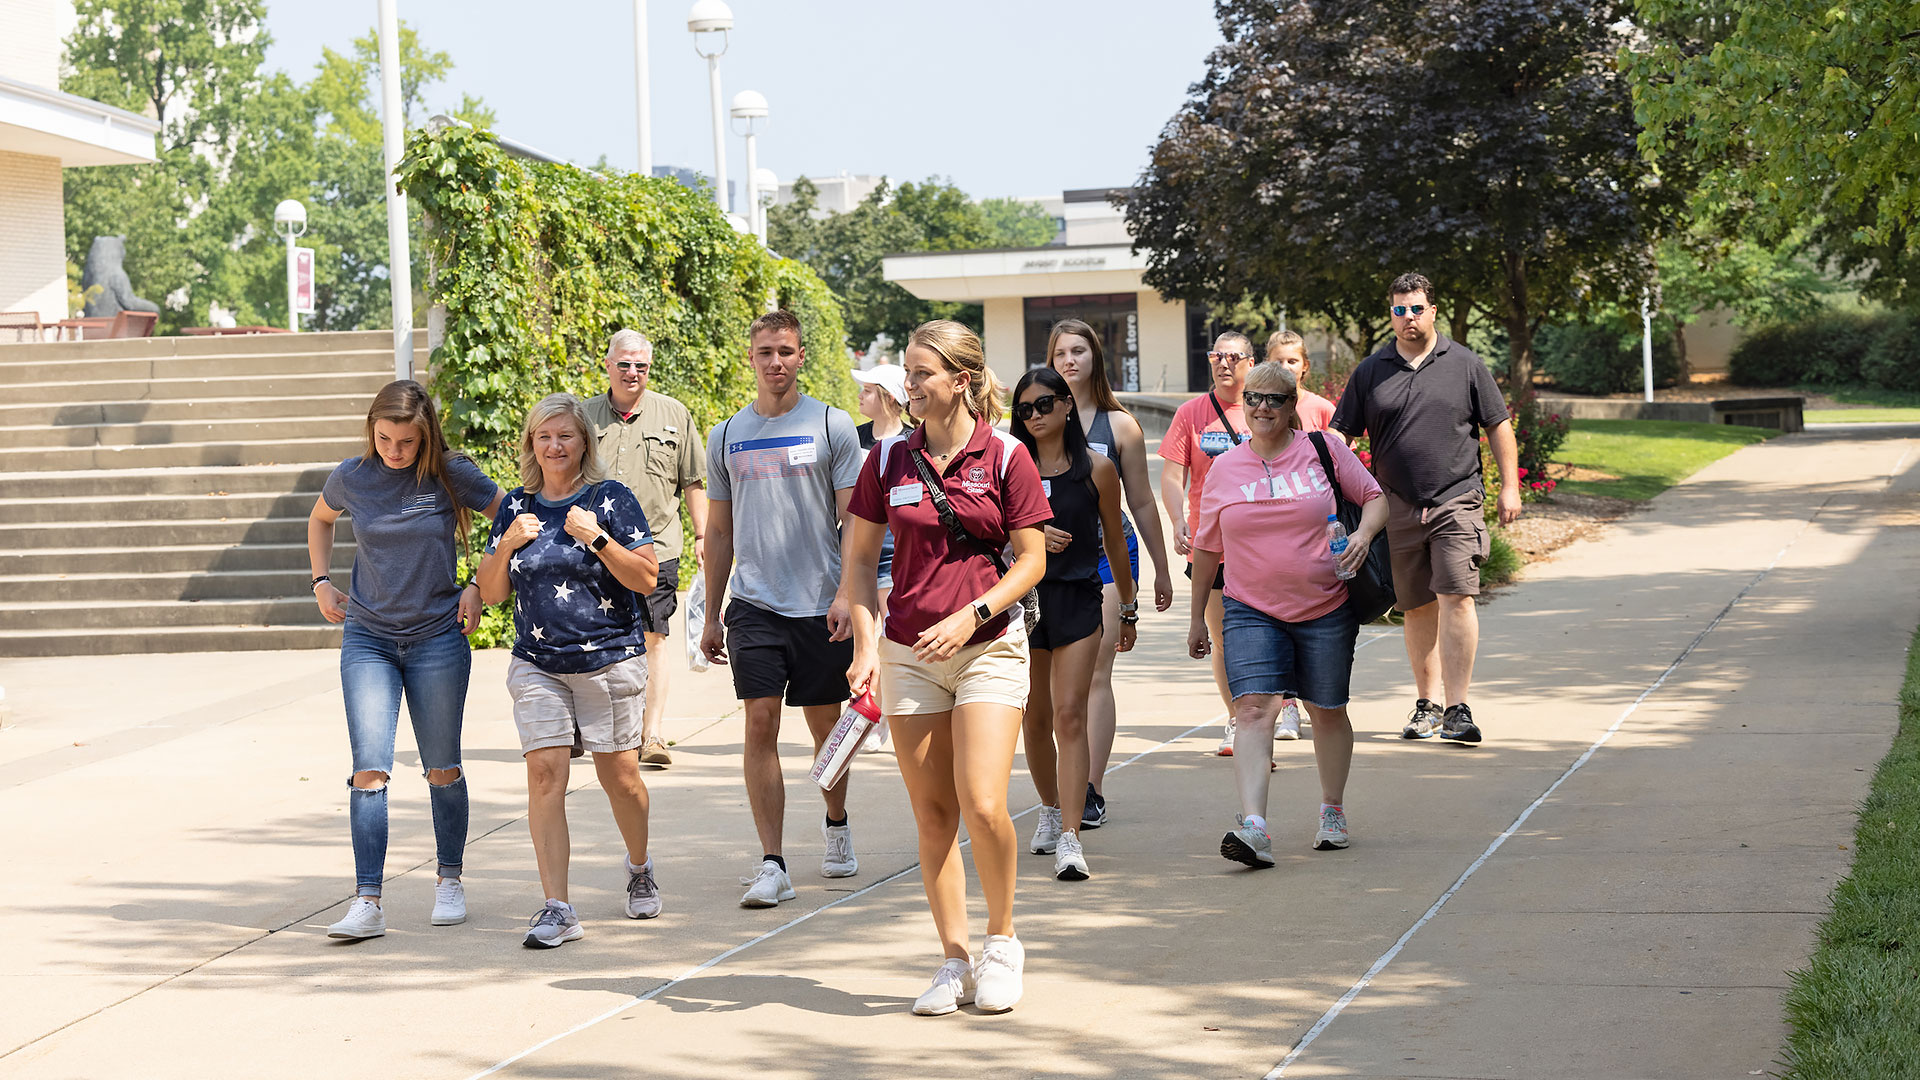 Future students and their families tour campus near the Plaster Student Union on a sunny day.